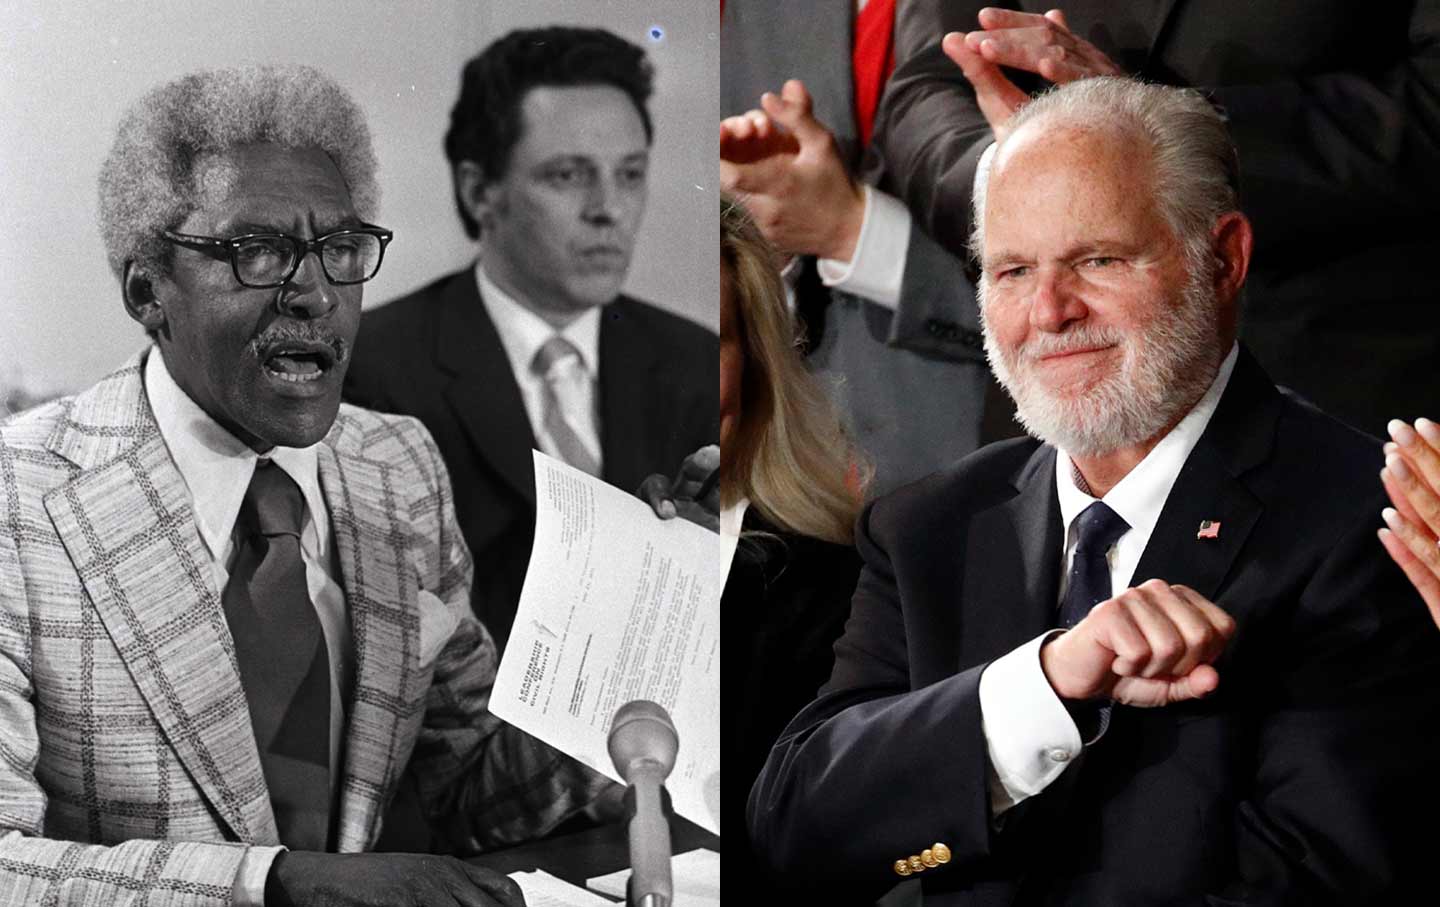 Rush Limbaugh and Bayard Rustin: A Tale of Two Countries